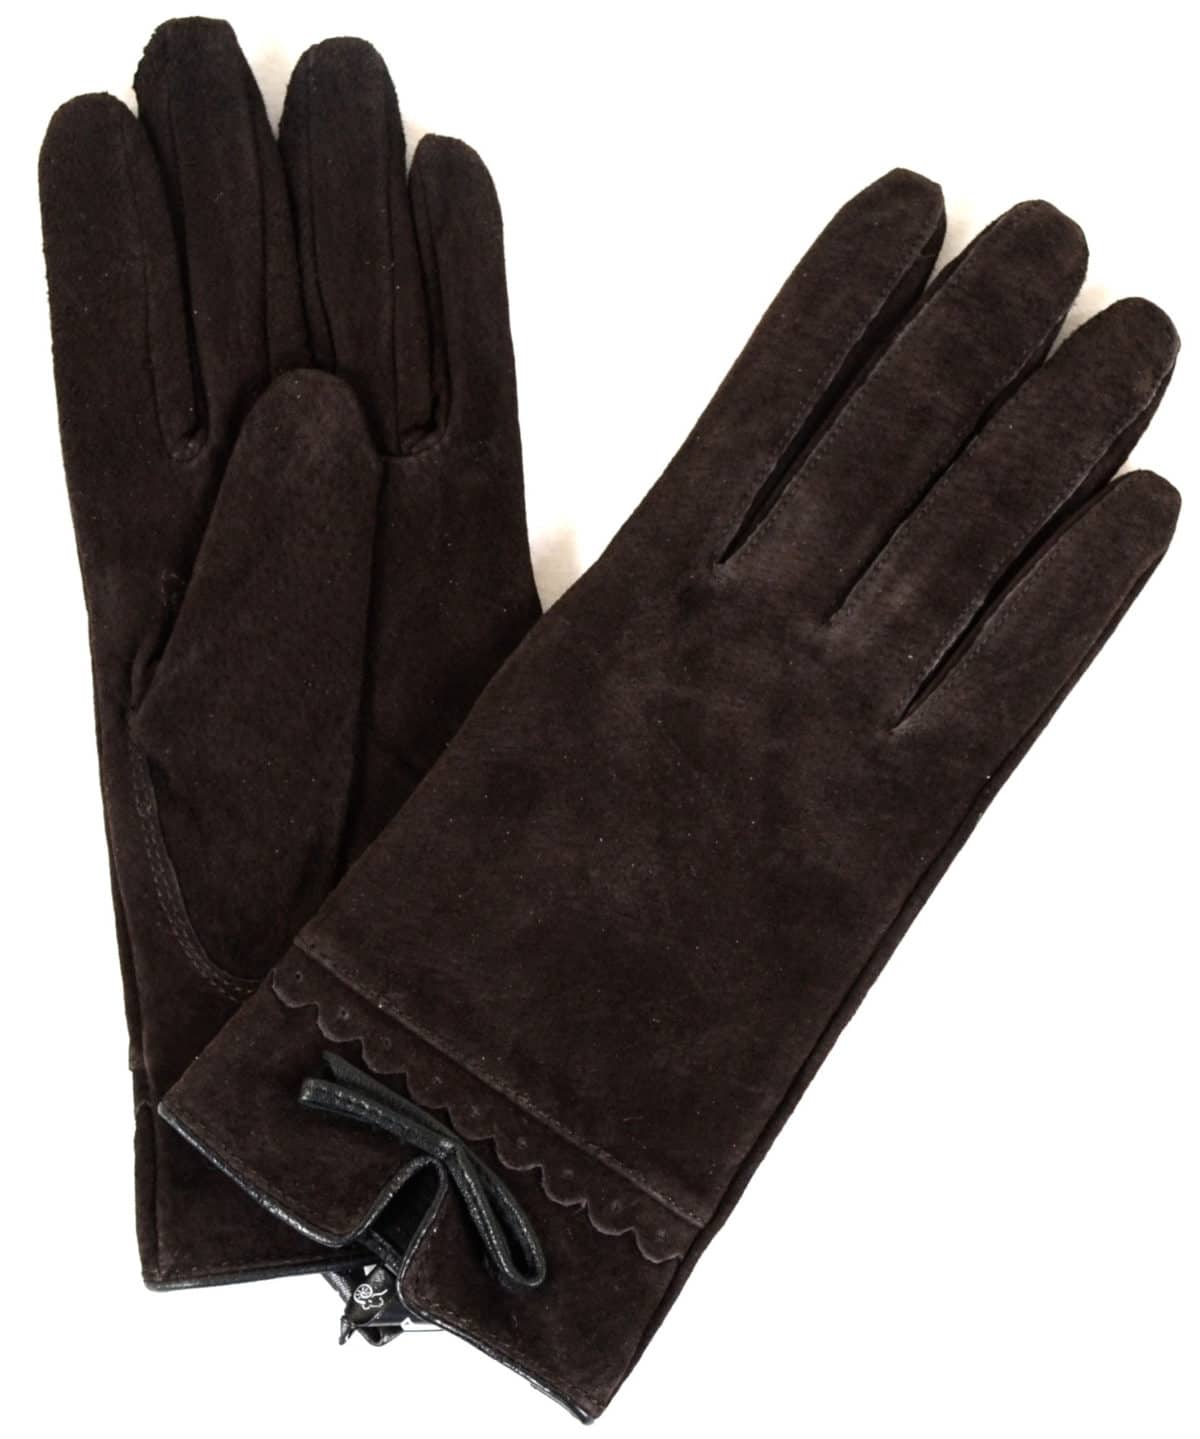 Suede Gloves Fleece Lining and Bow Feature - Brown